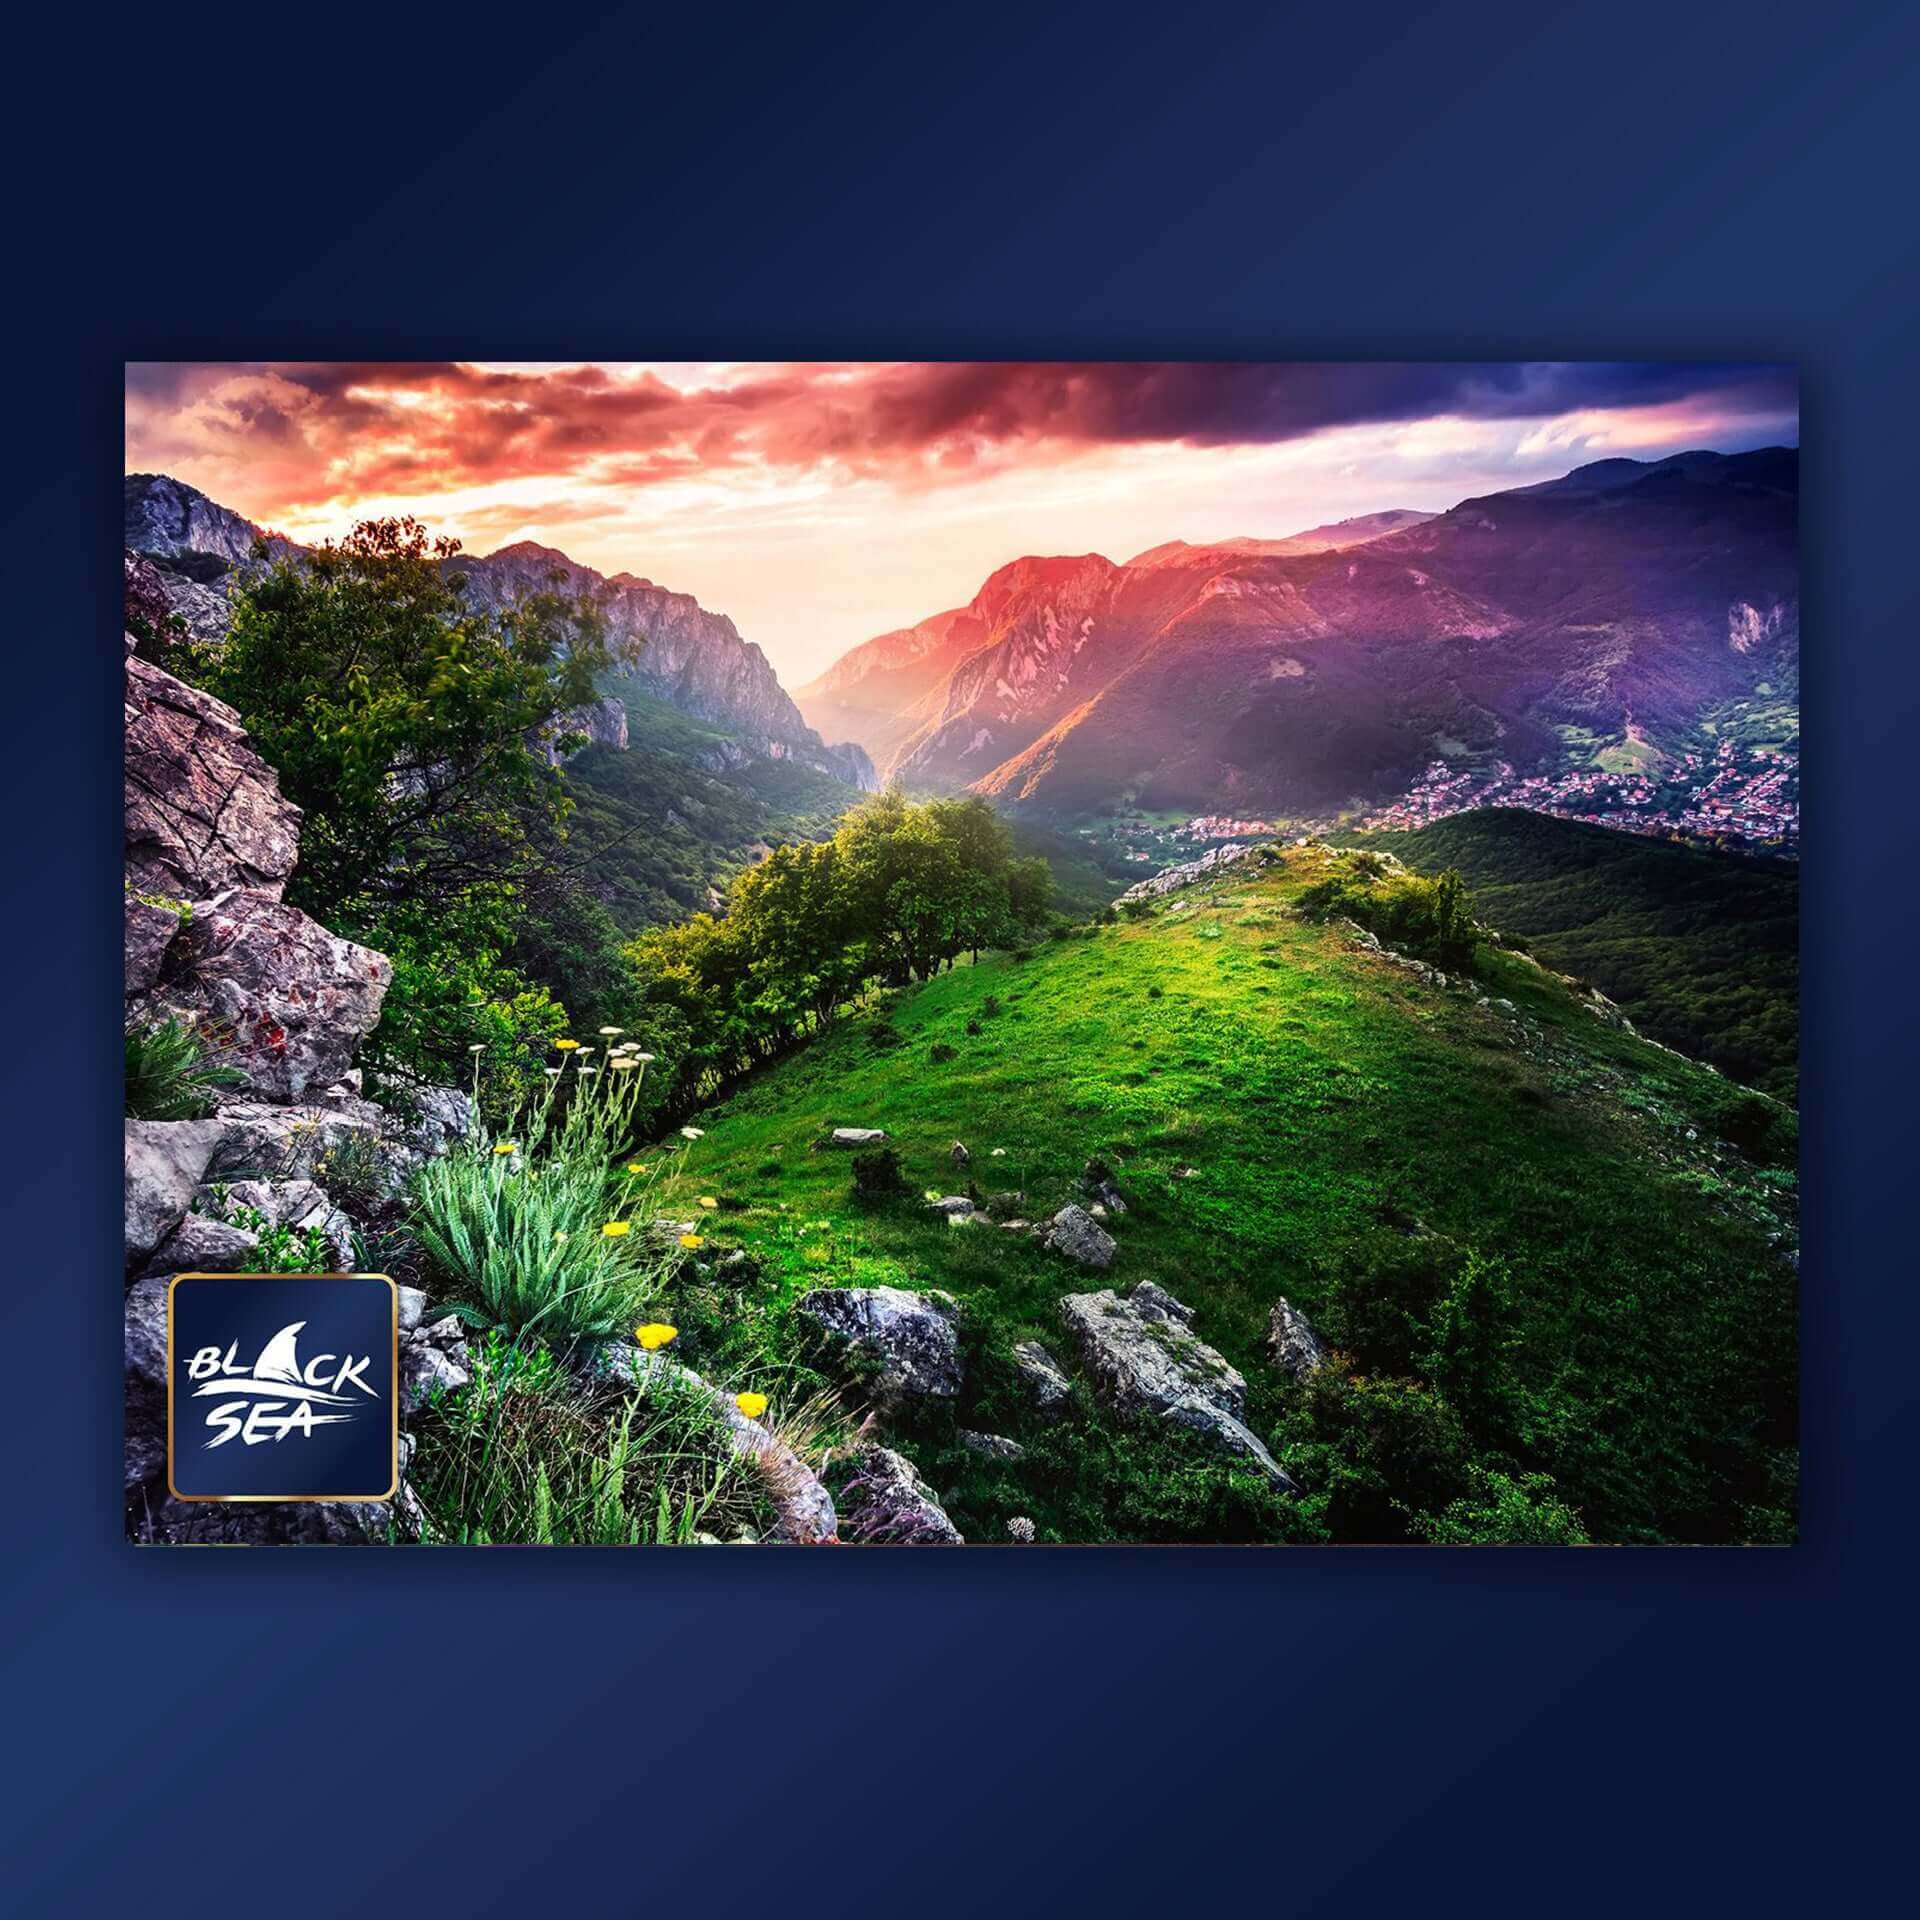 Puzzle Black Sea 1000 pieces - Sunrise over the mountain, The Vrachanski Balkan range impresses with the austerity of its beautiful nature; the sharp, jagged outline of its vertical cliffs rises to more than 400 metres, and among the cliffs more than 500